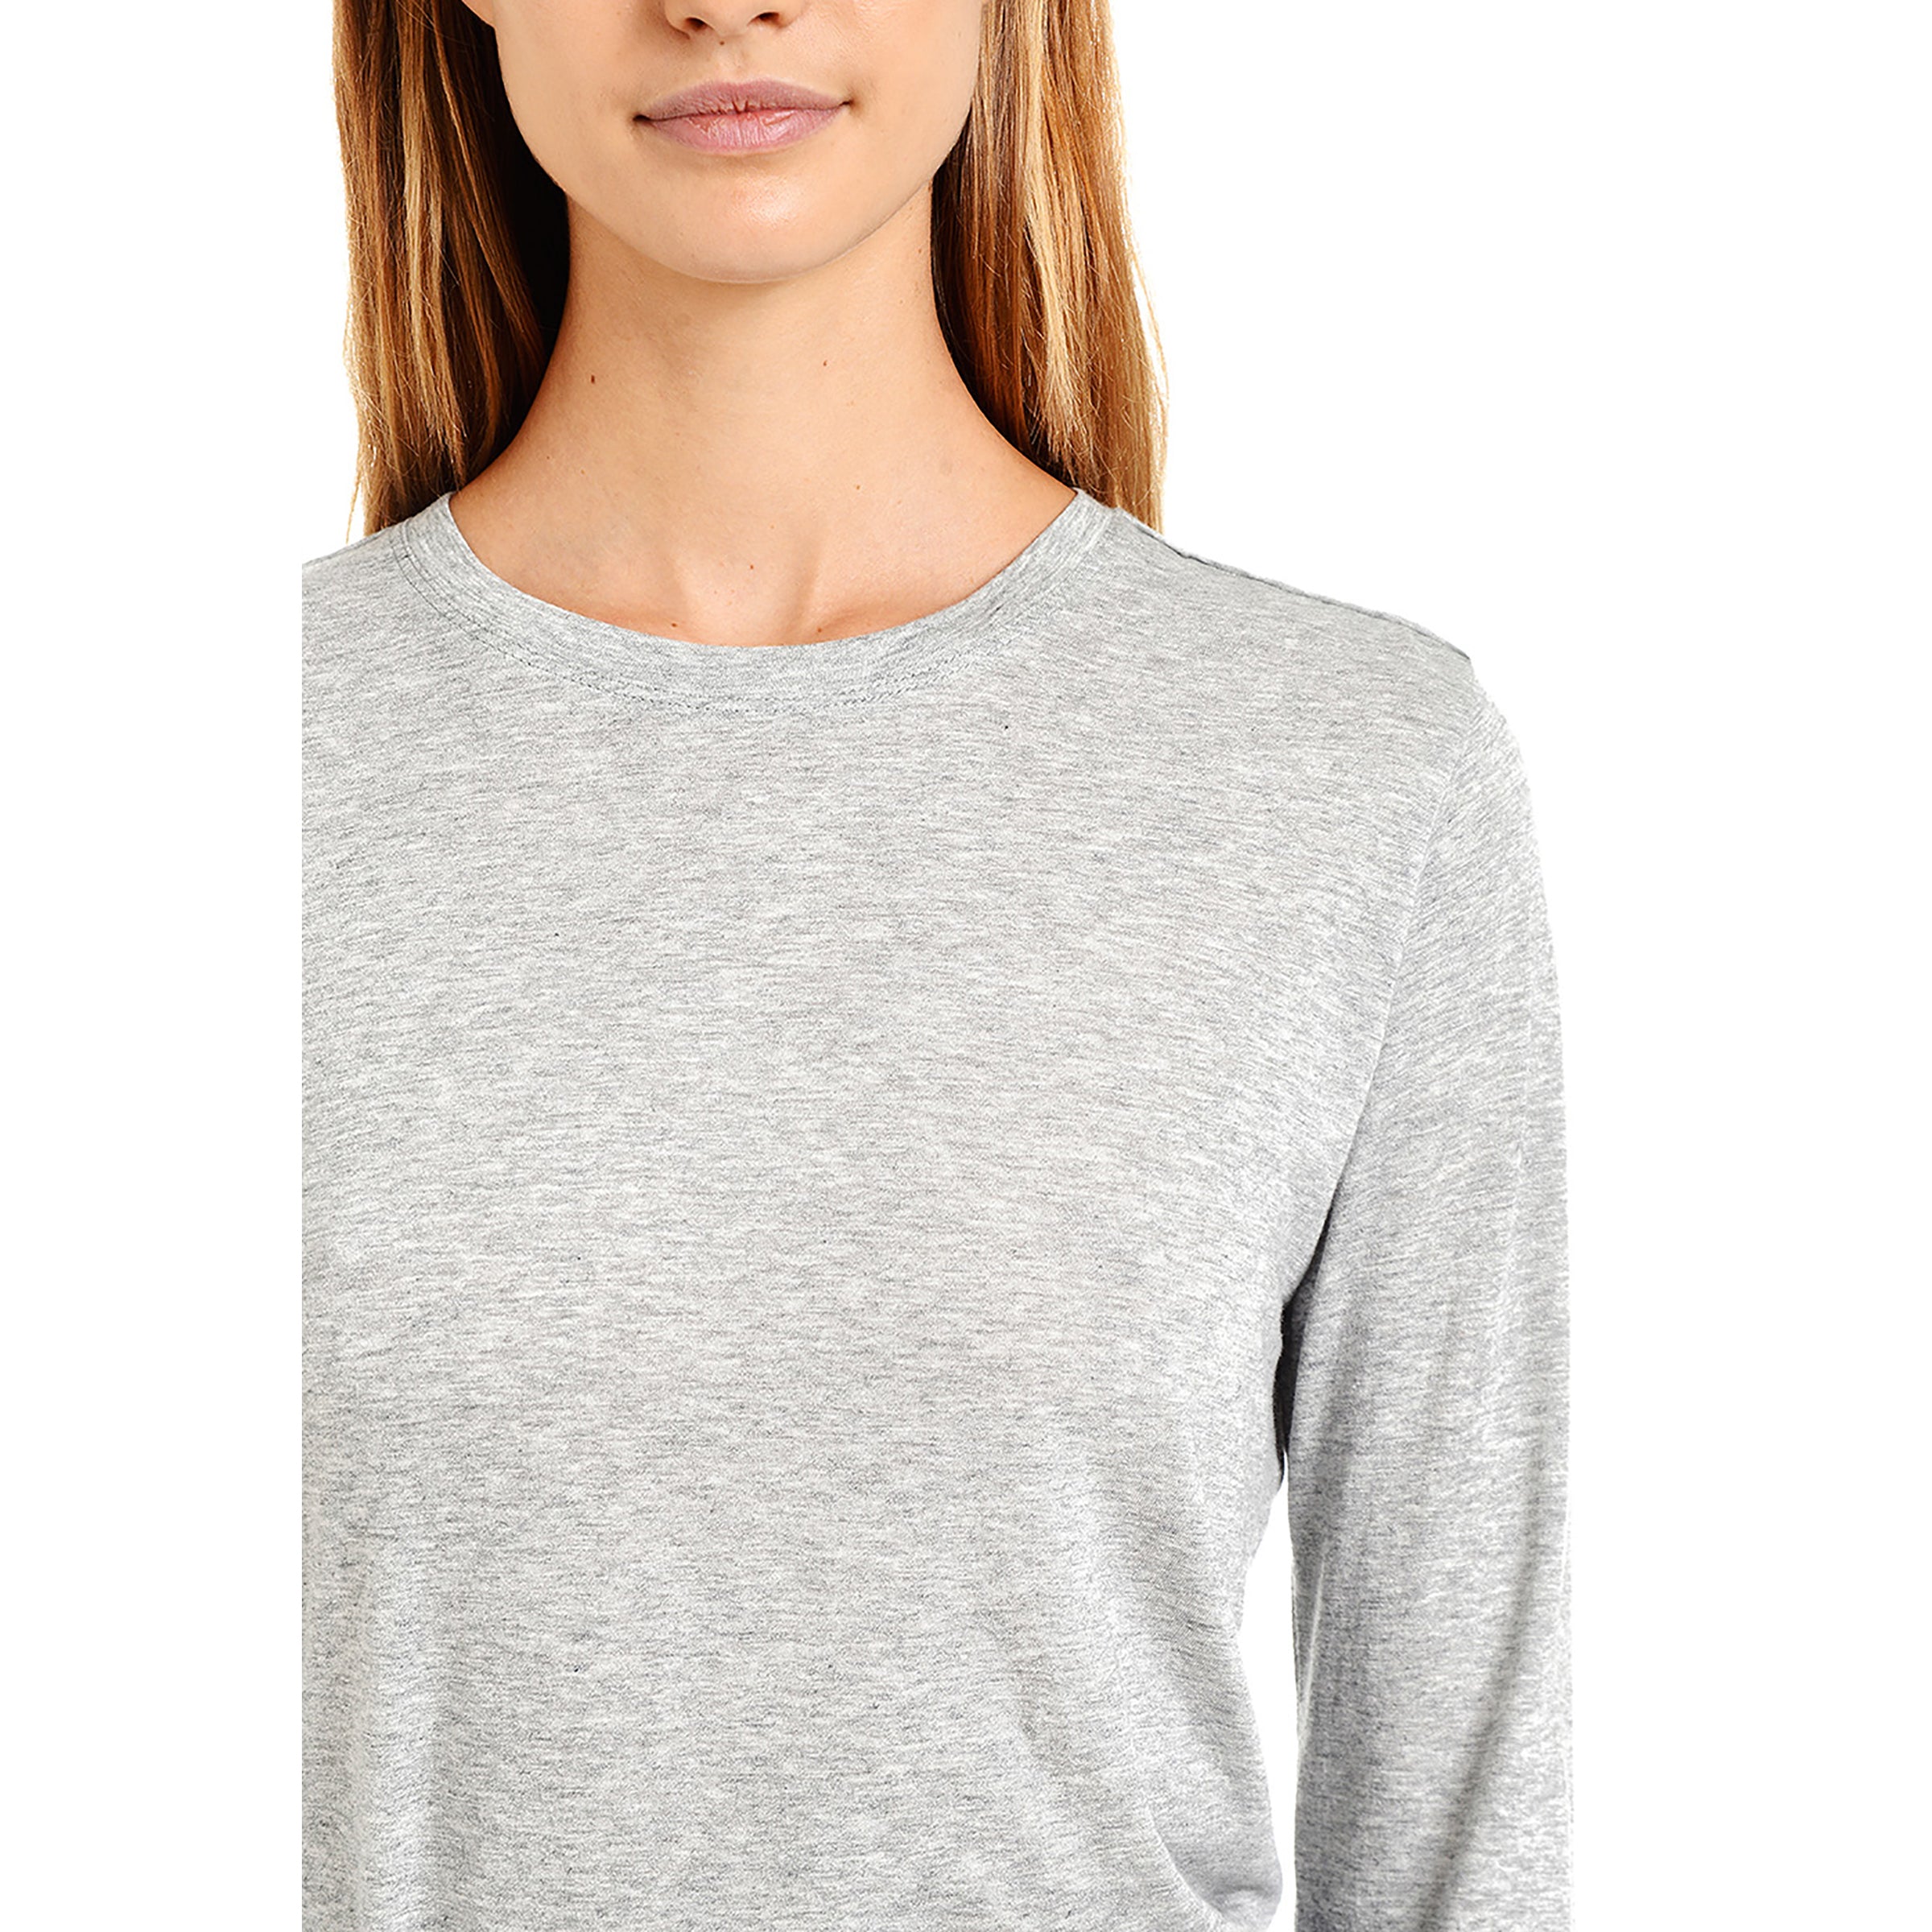 Women wearing Gris Chiné Long Sleeve Crew Tee Marcy